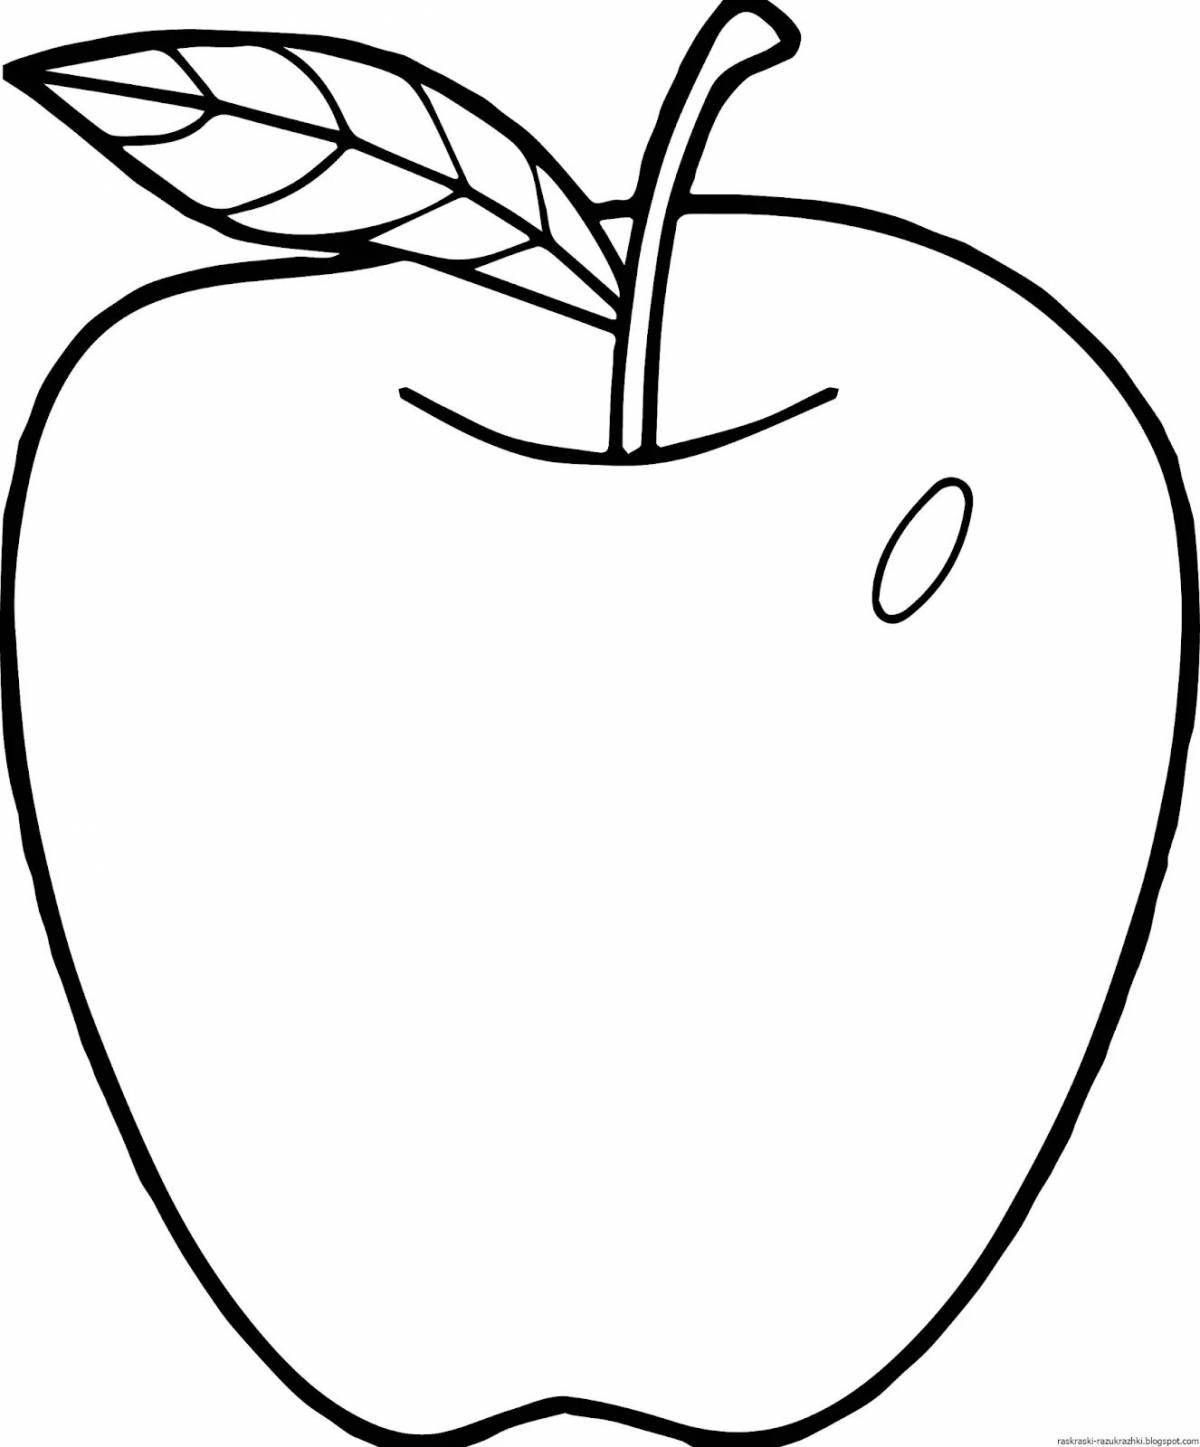 A fun apple coloring book for 4-5 year olds